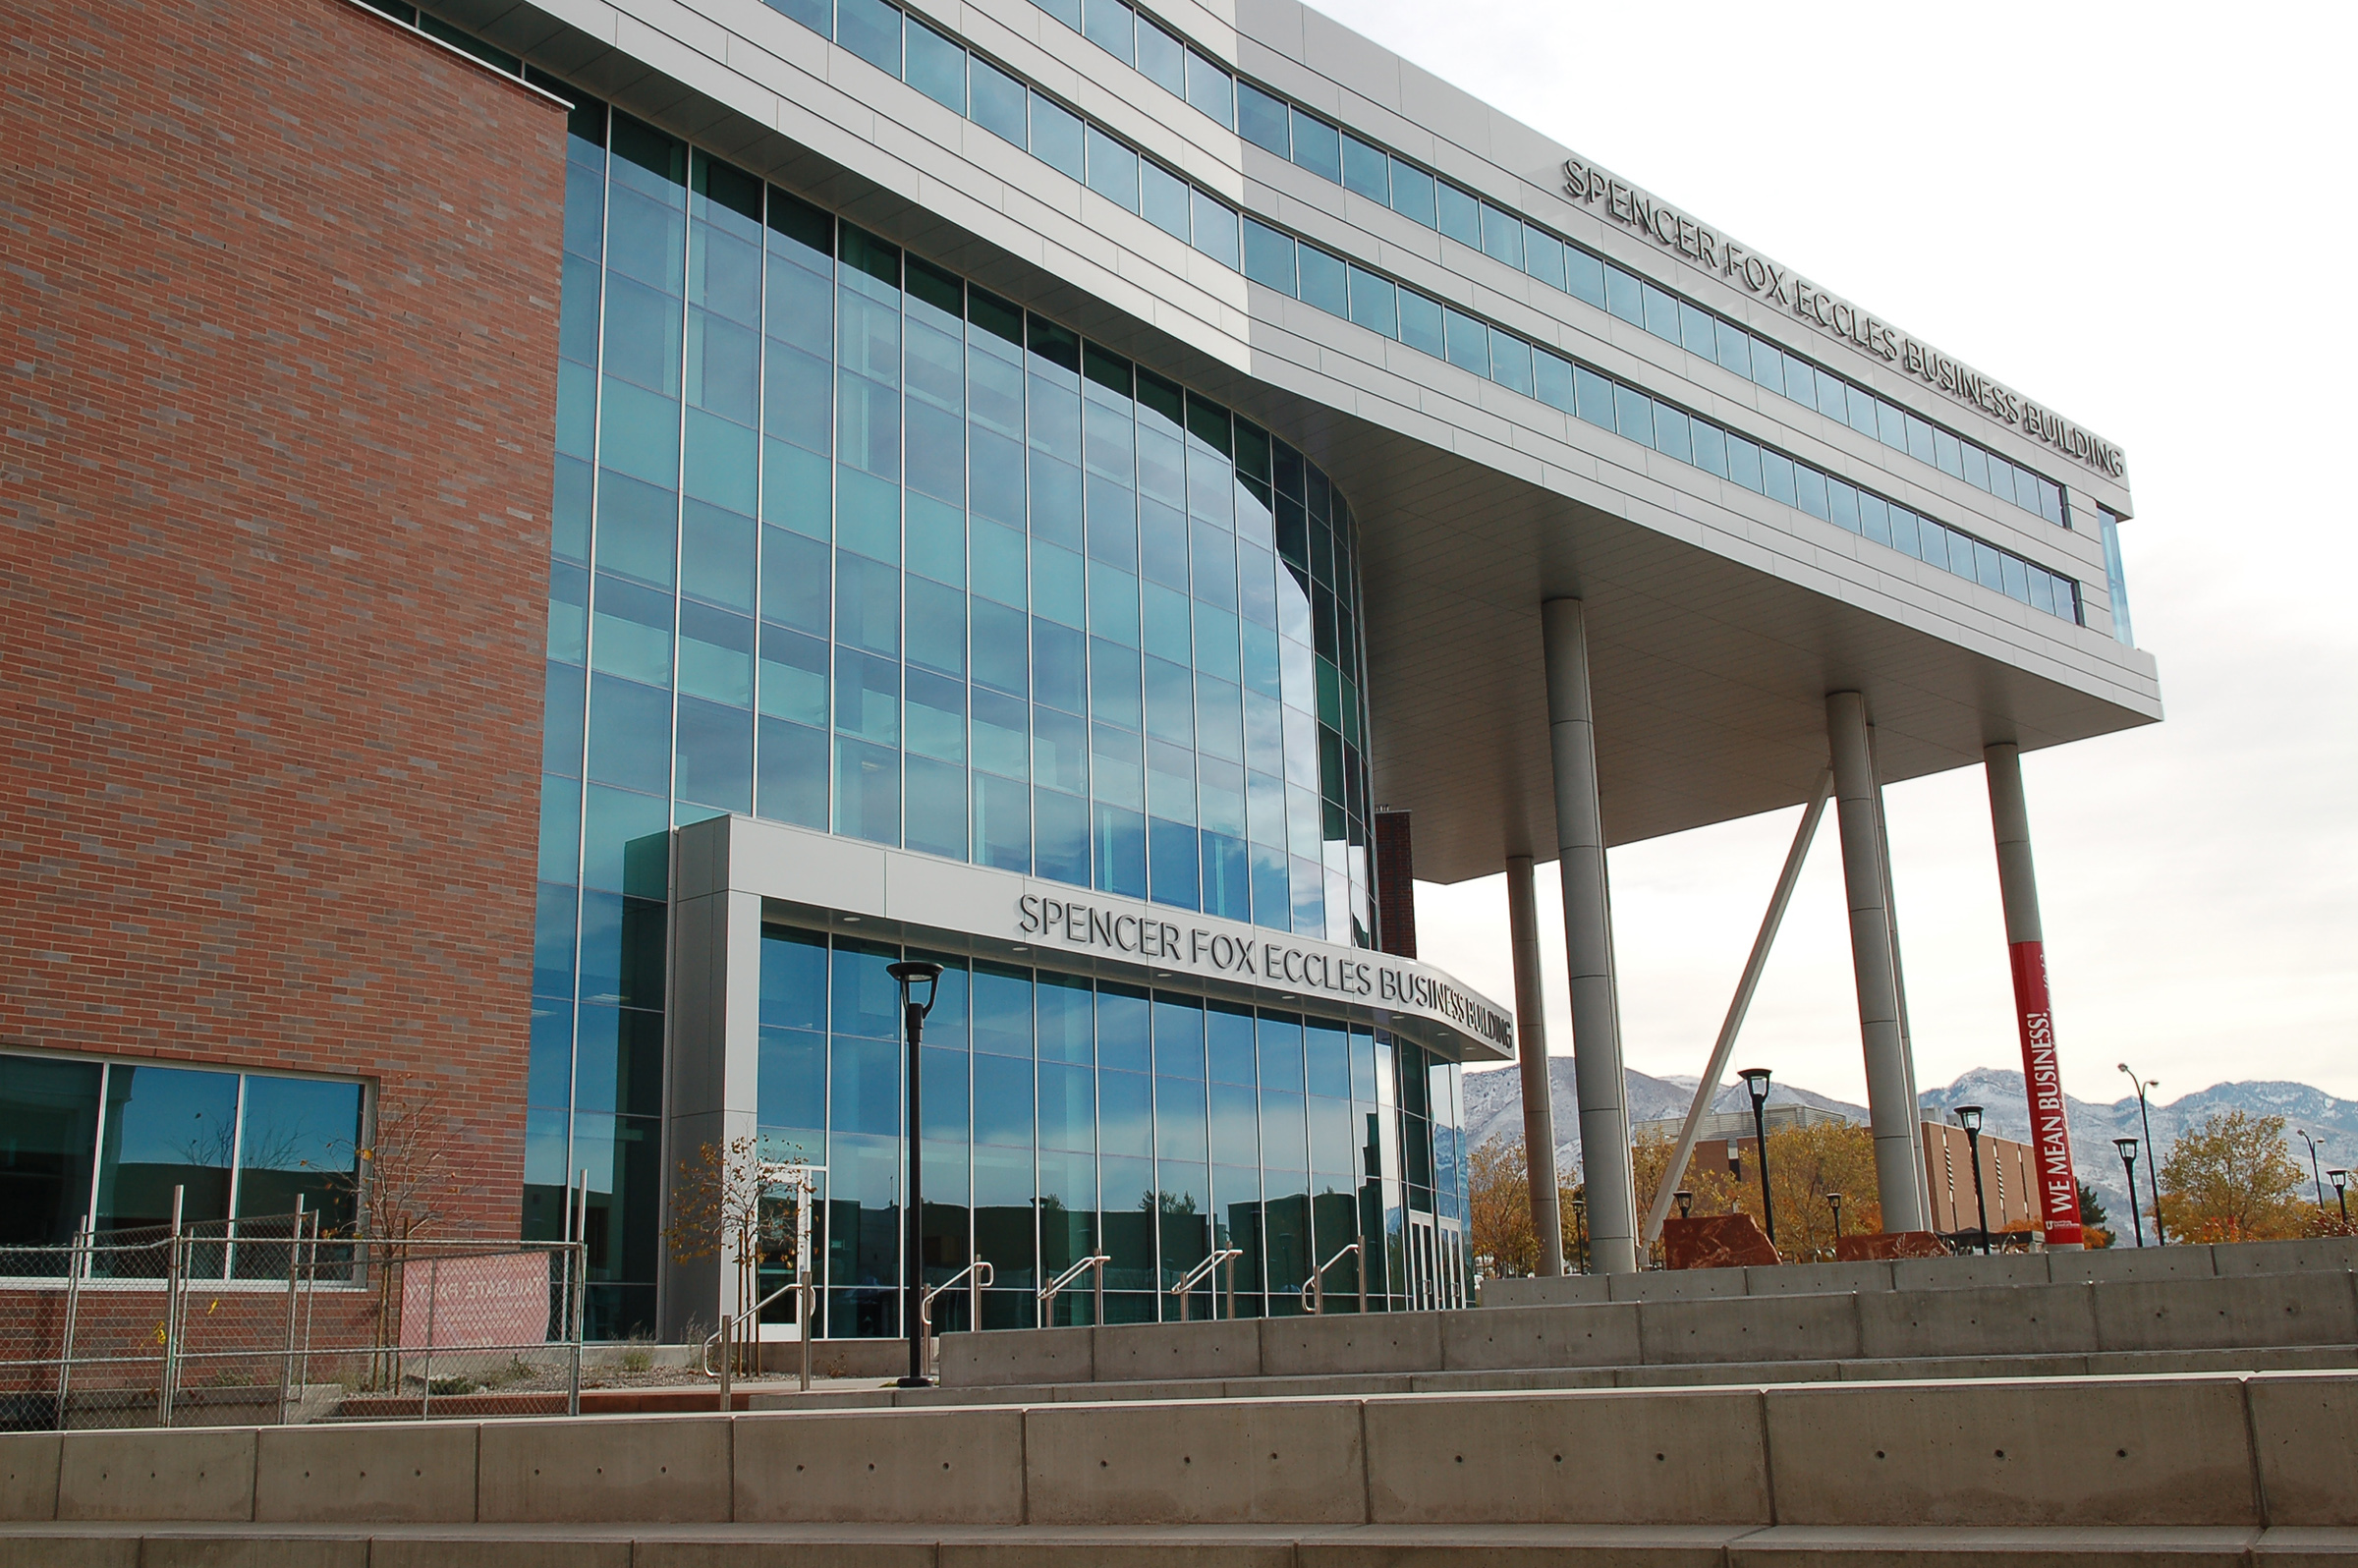 The Spencer Fox Eccles Business building is the newest building at the University of Utah’s David Eccles School of Business.